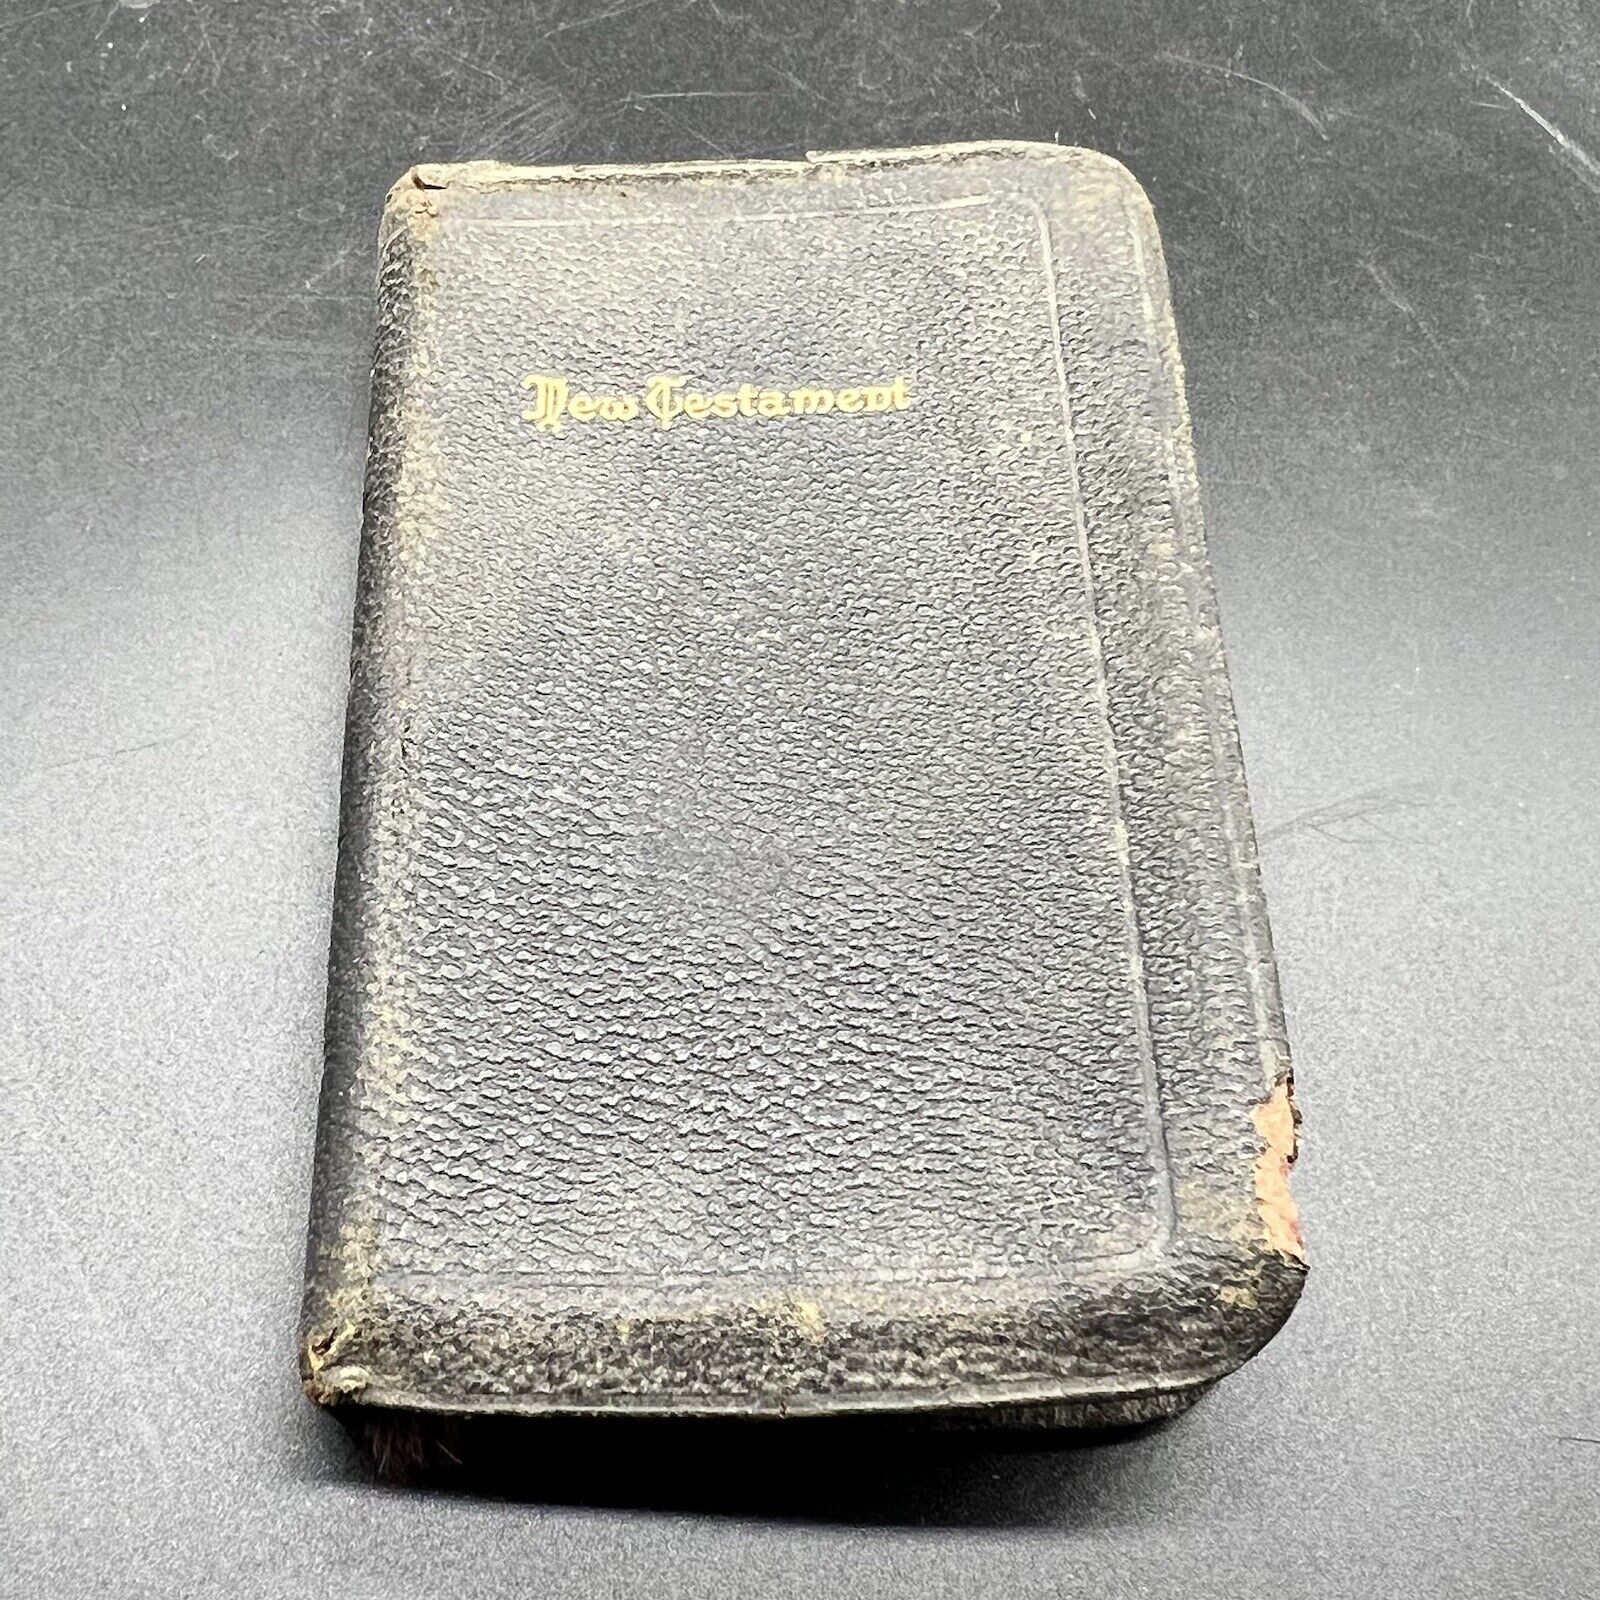 Early 1900s New Testament Genuine Leather